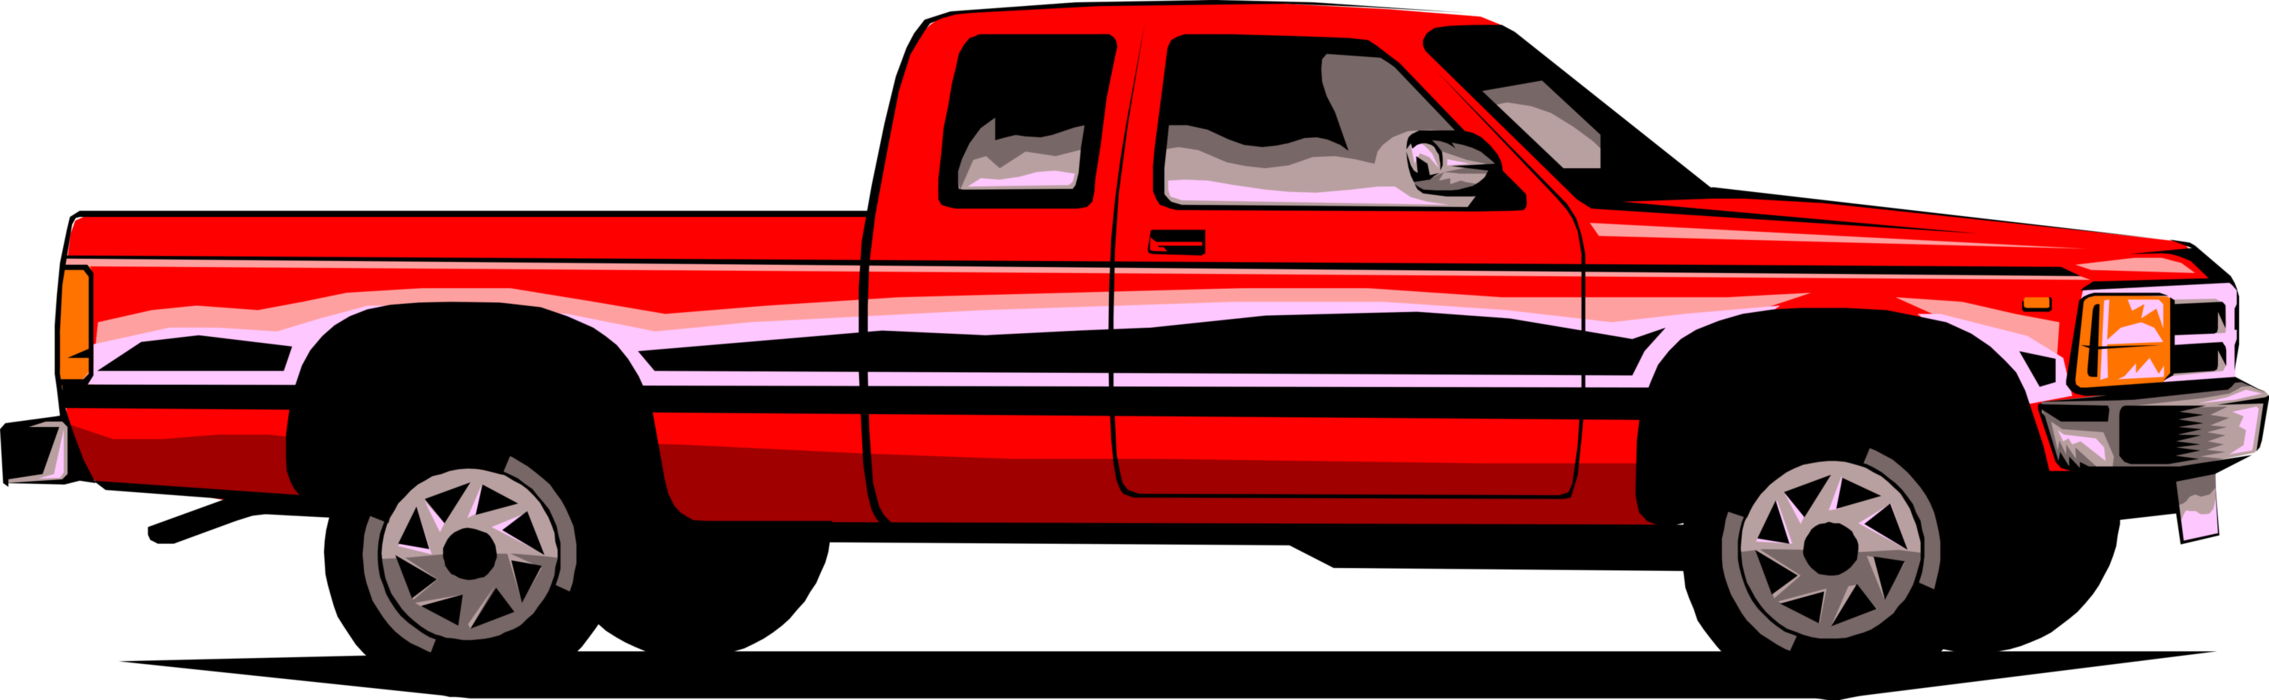 Vector Illustration of Pickup Truck or Light Duty Truck with Open Cargo Area